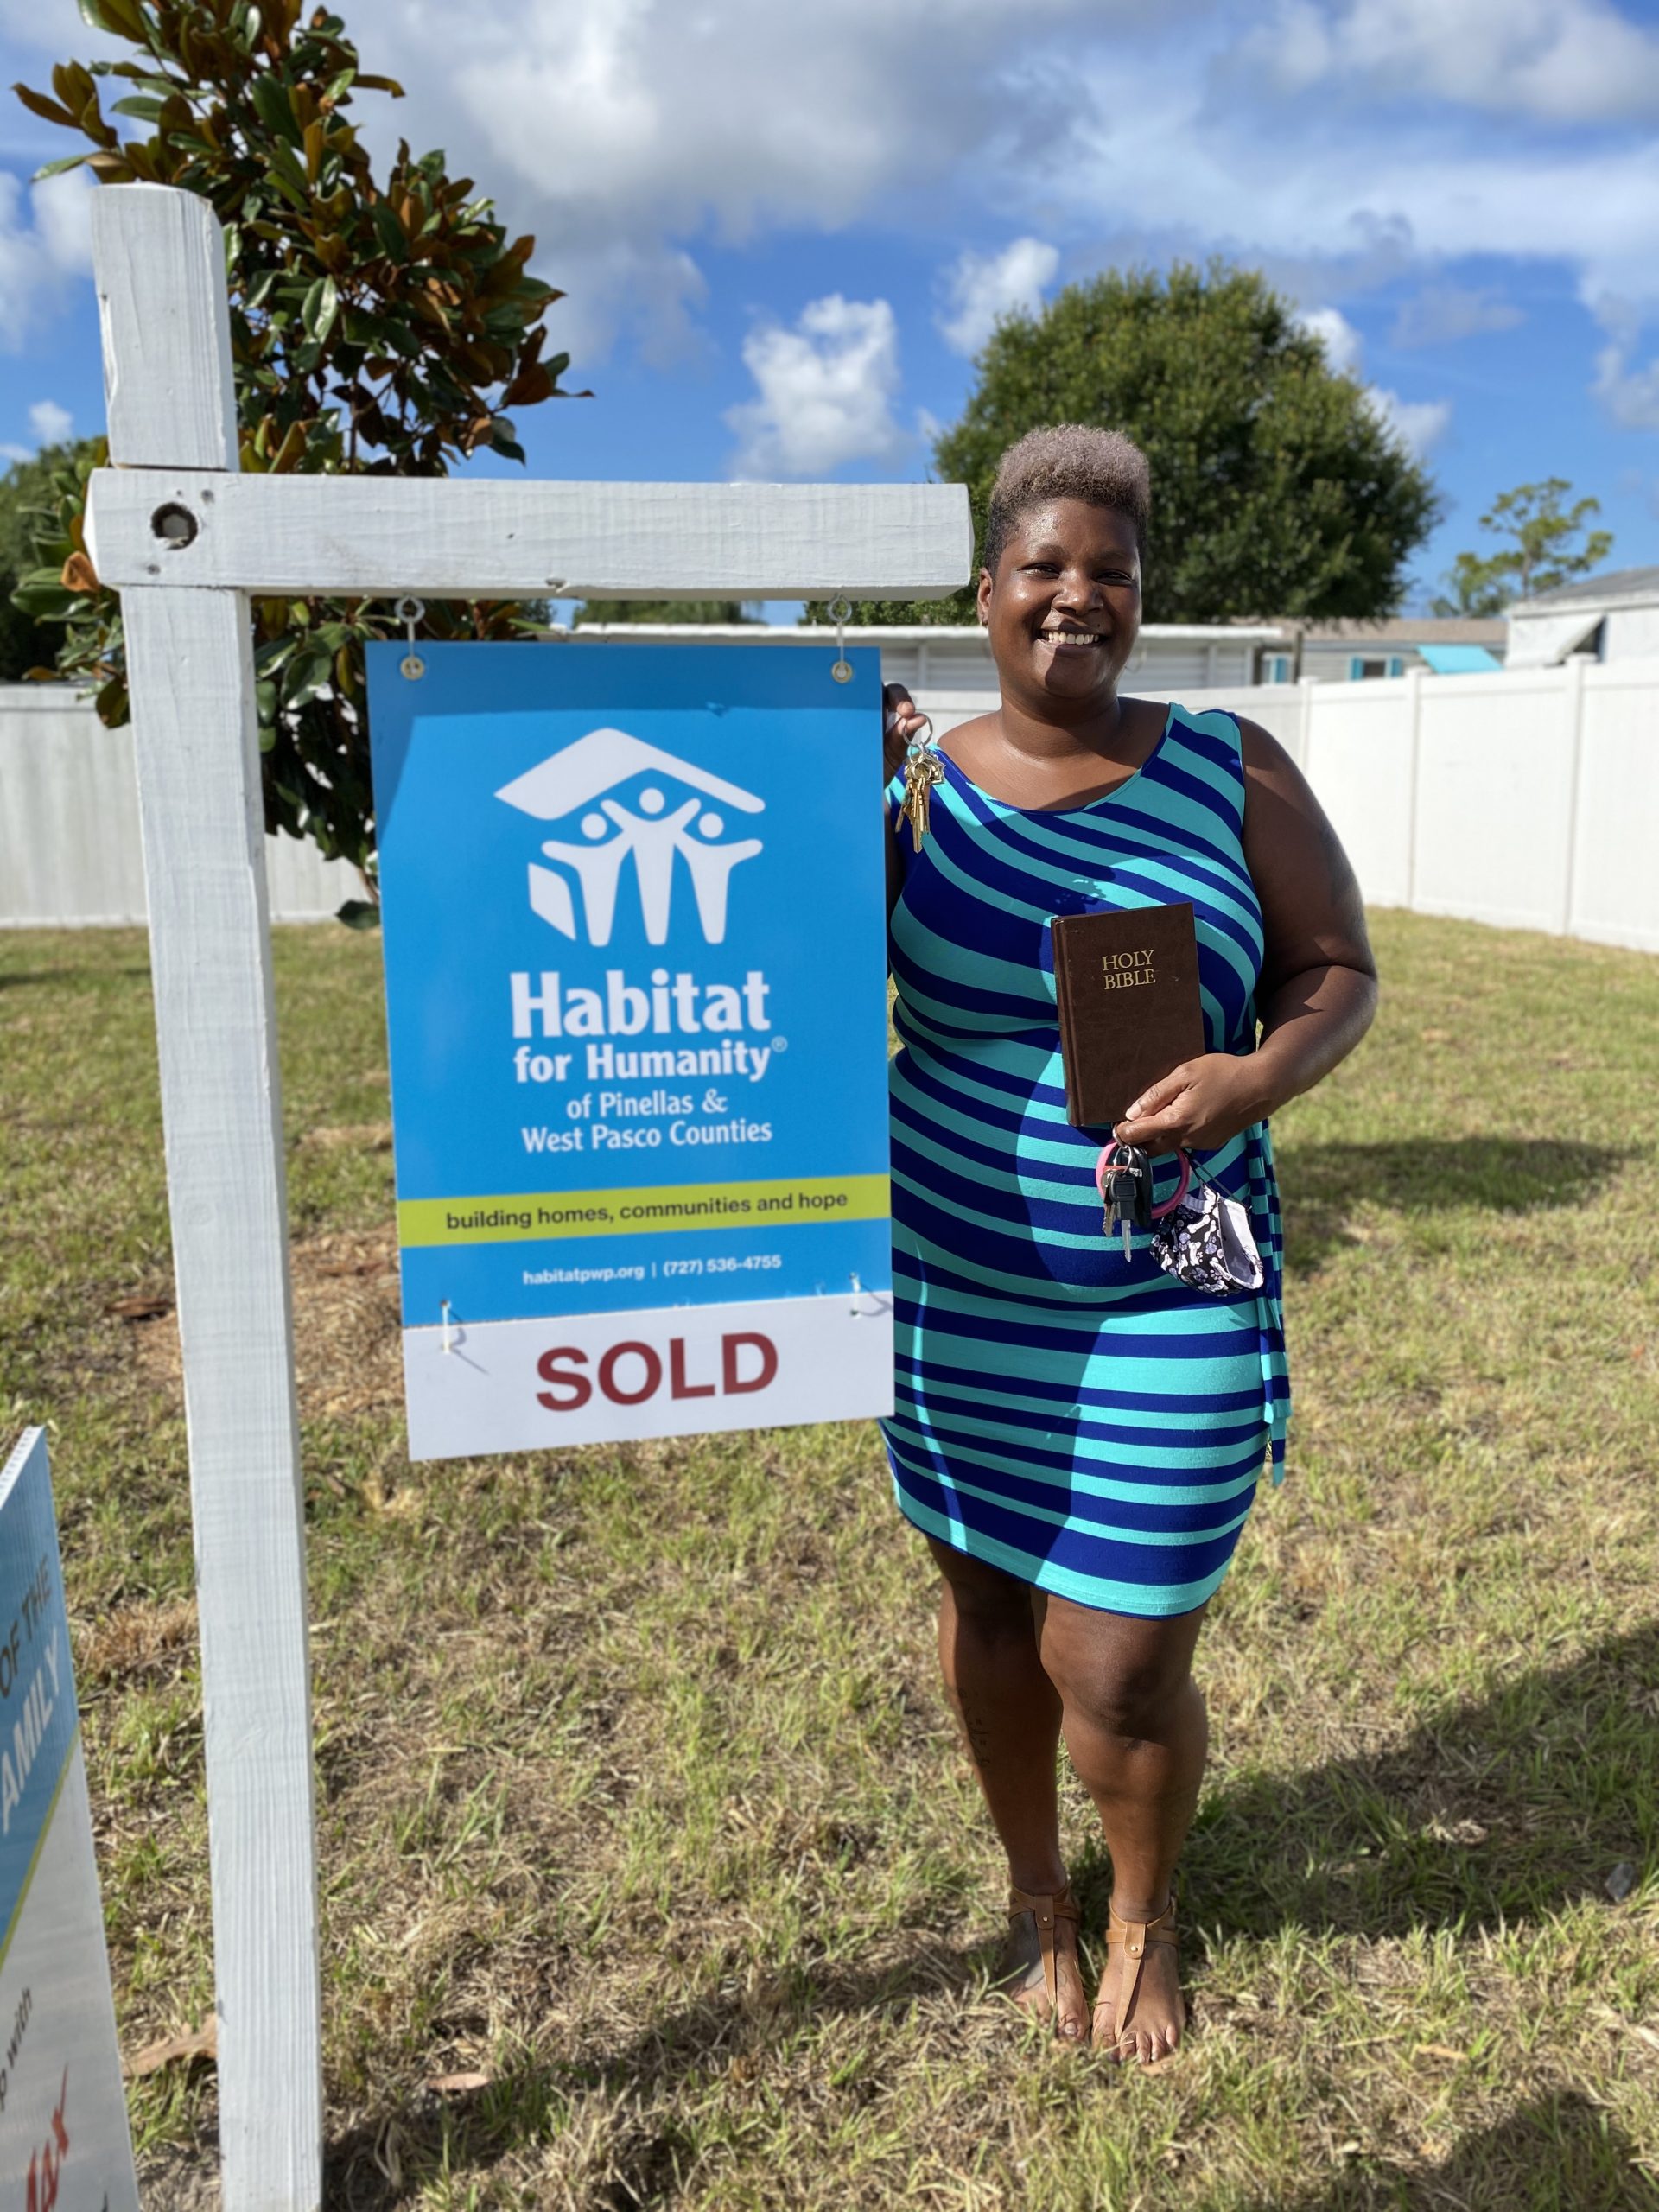 MarineMax Partners Dedicates Another Habitat for Humanity Home to Local Family